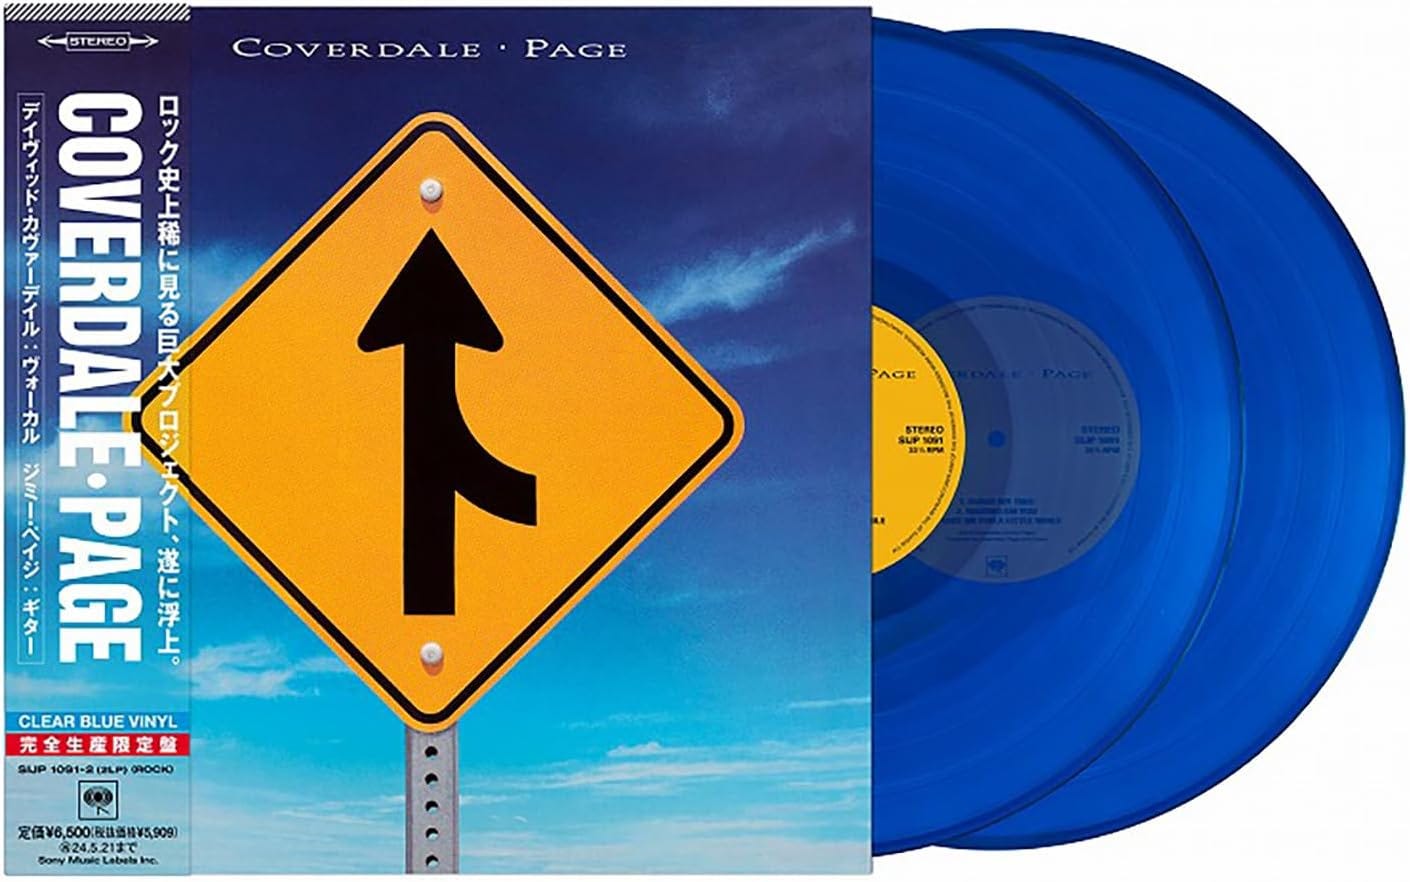 The Bizarre Saga of the Coverdale Page 30th Anniversary Release